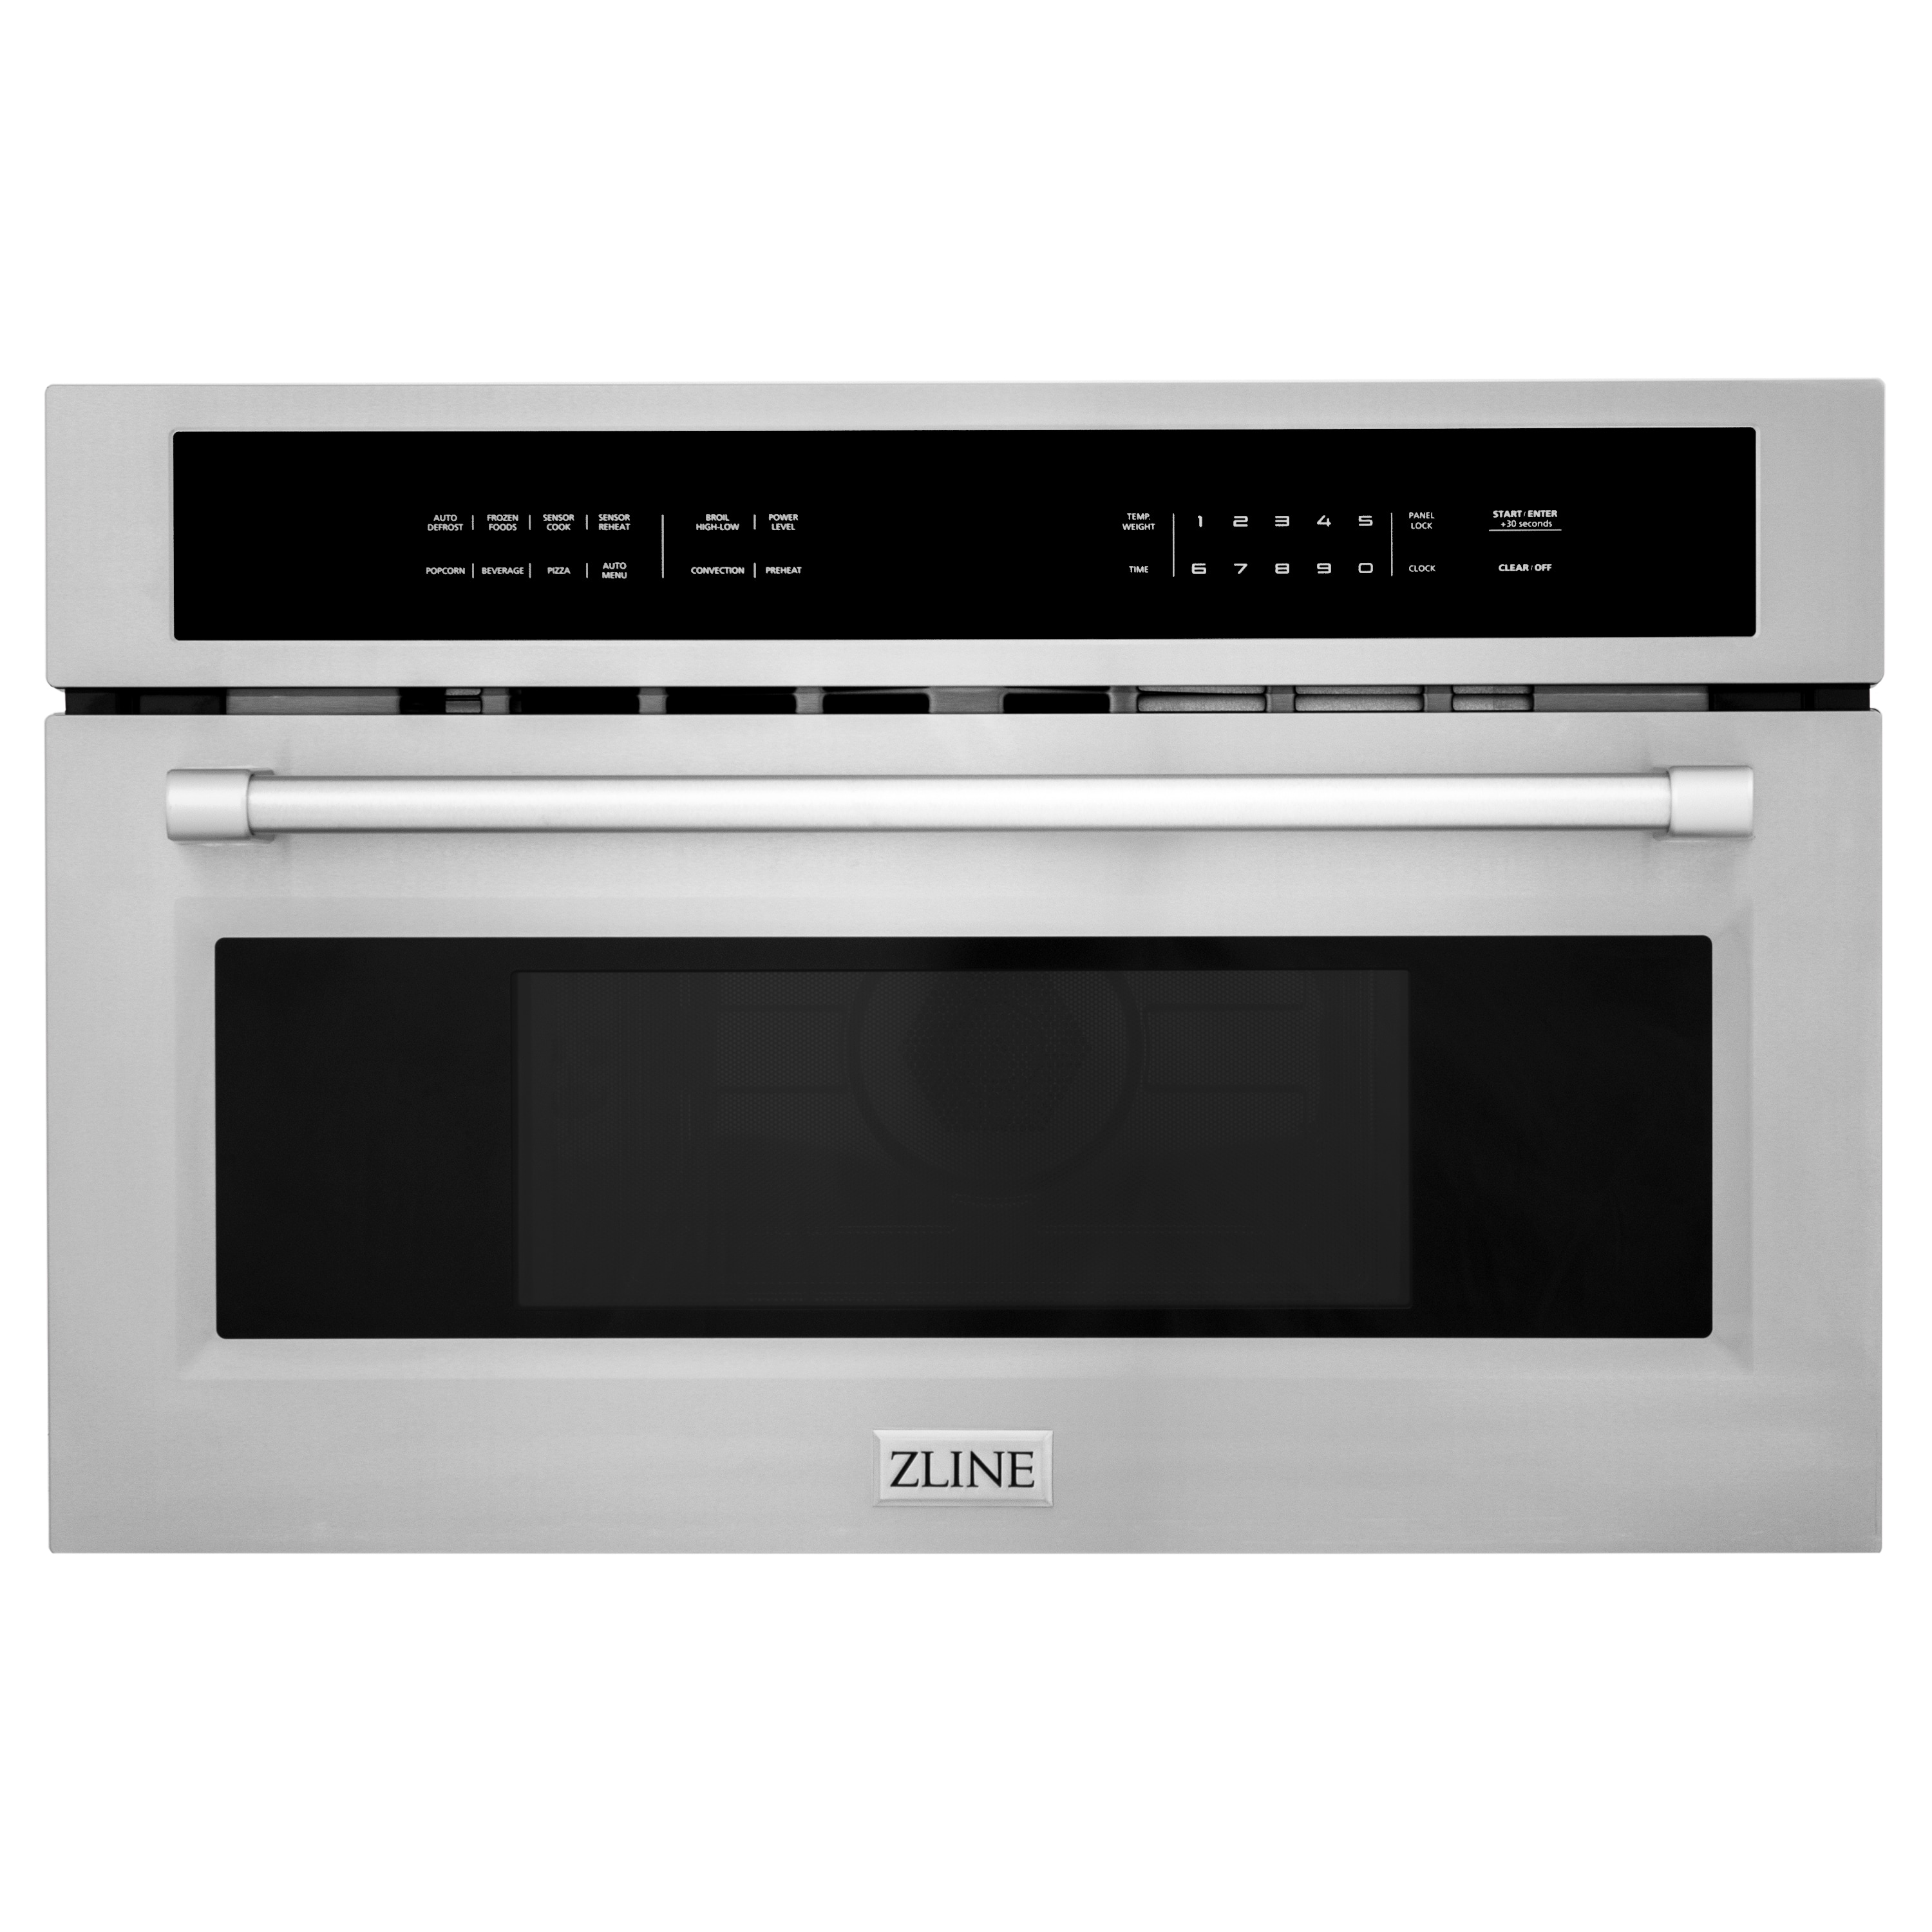 ZLINE 24 Built-in Convection Microwave Oven in Black Stainless Steel with Speed and Sensor Cooking 